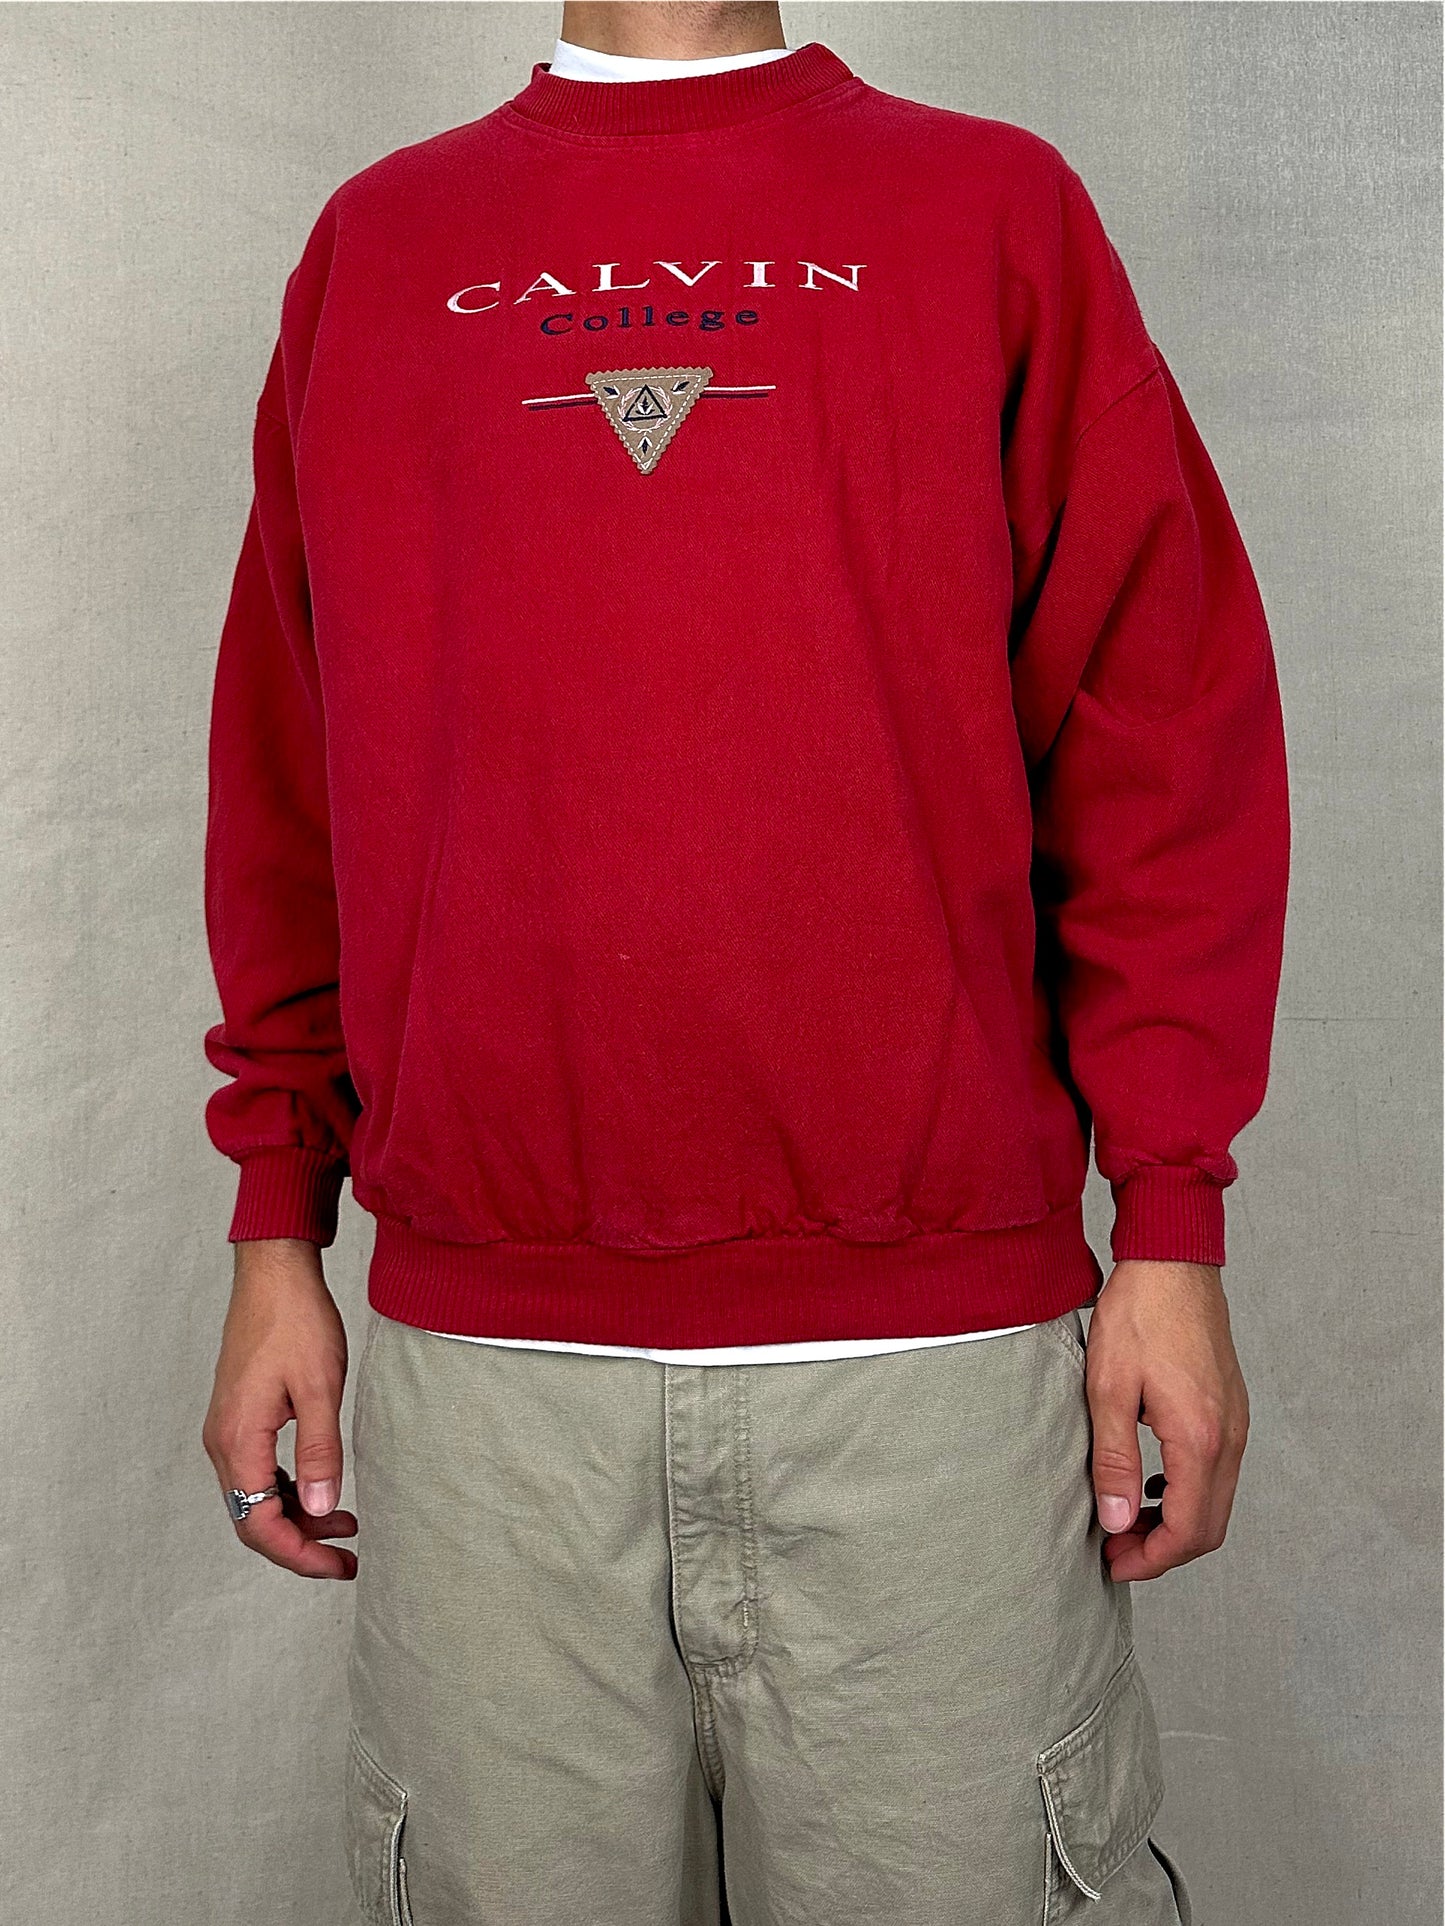 90's Calvin College USA Made Embroidered Vintage Sweatshirt Size M